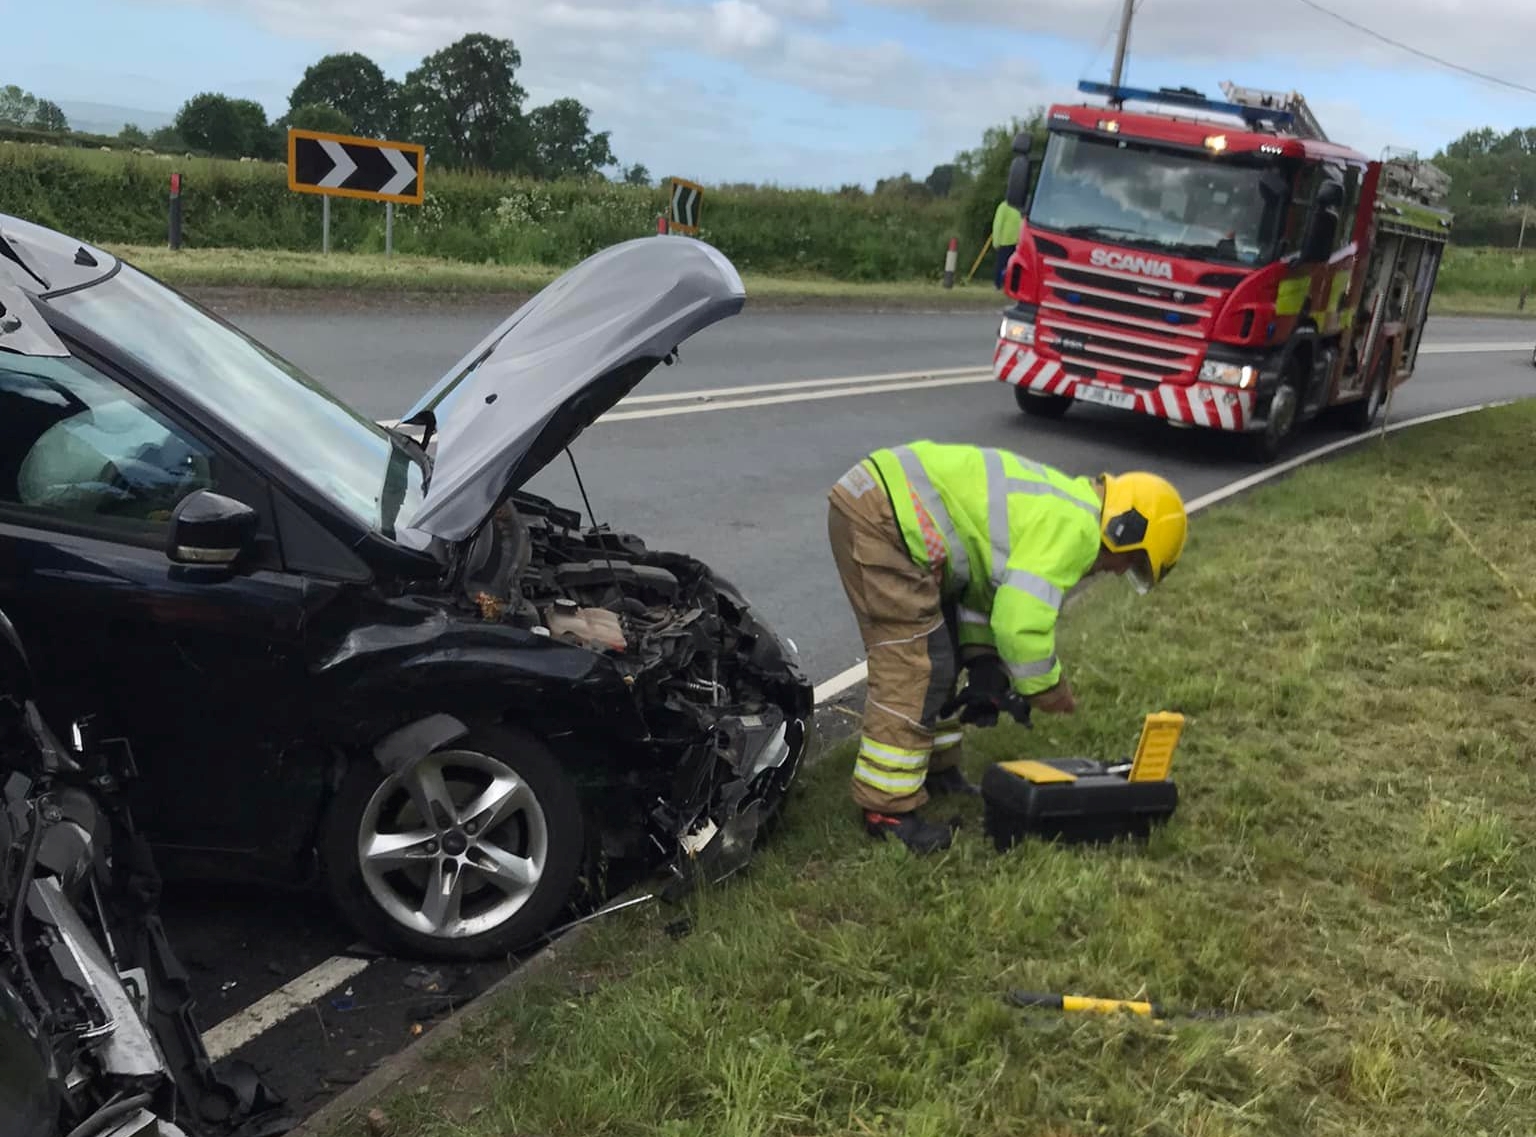 NEWS | Fire crews helped to support Police at a collision in Herefordshire this morning